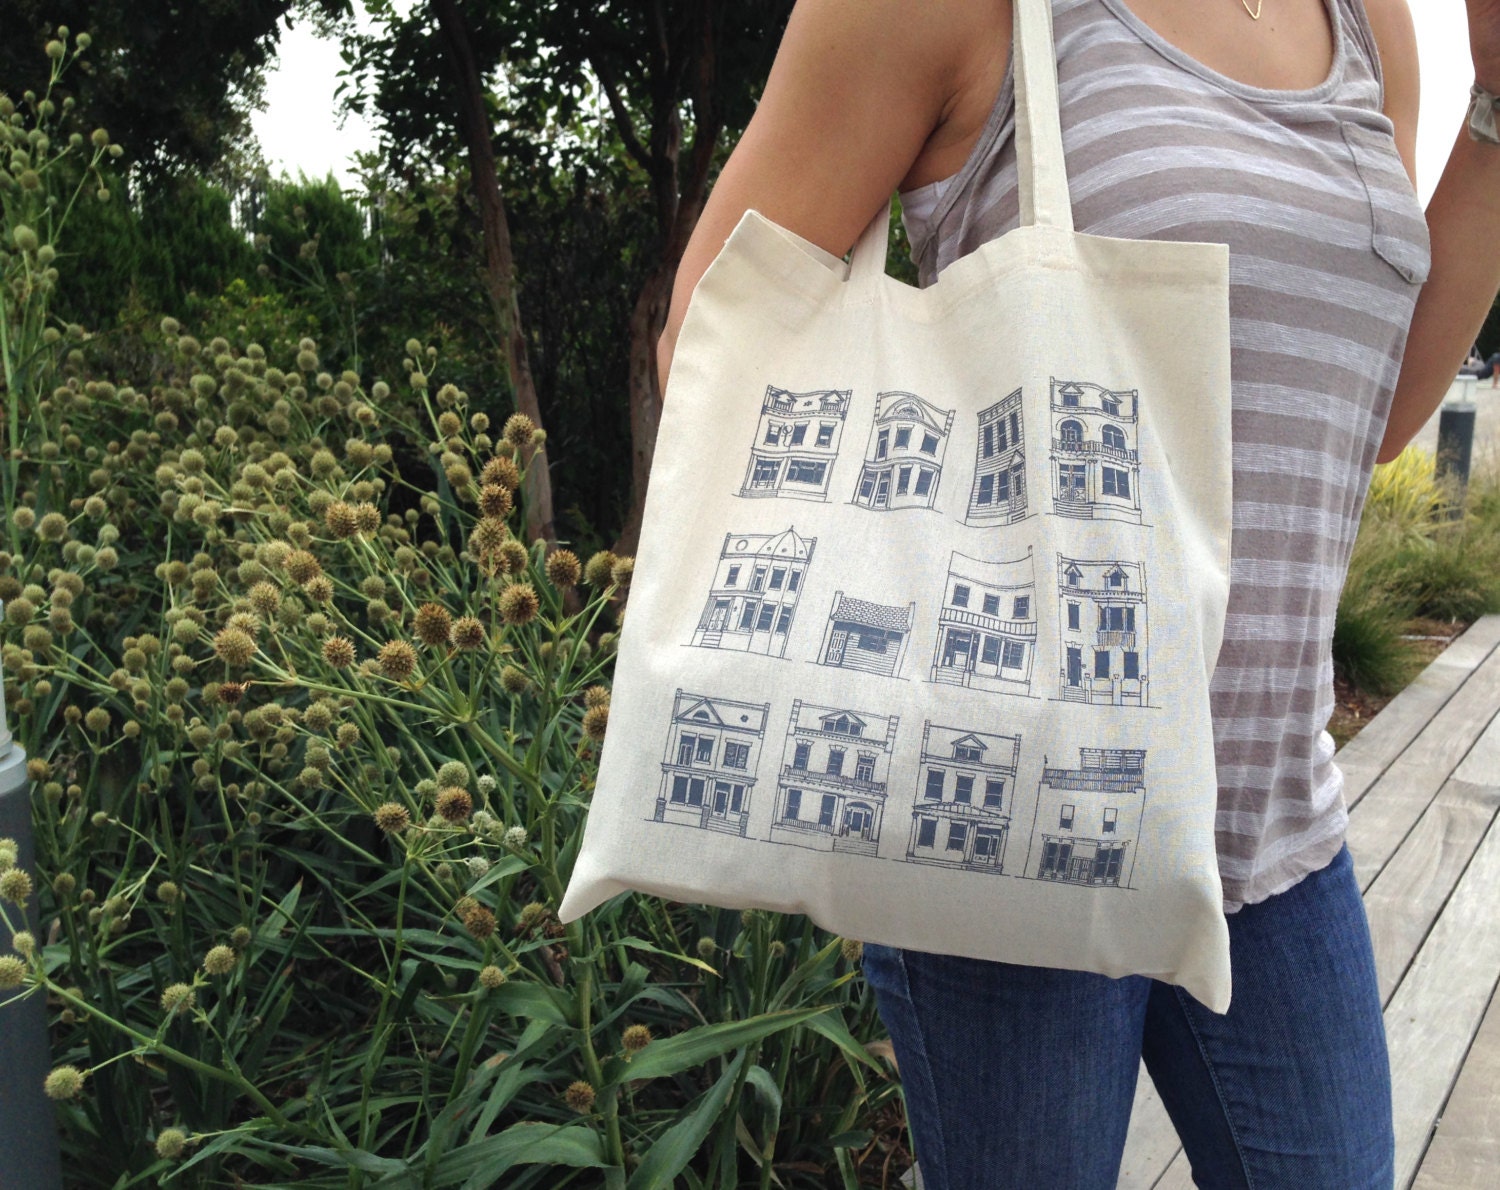 Tote Bag of Richmond Row Houses by LightboxPrintCo on Etsy